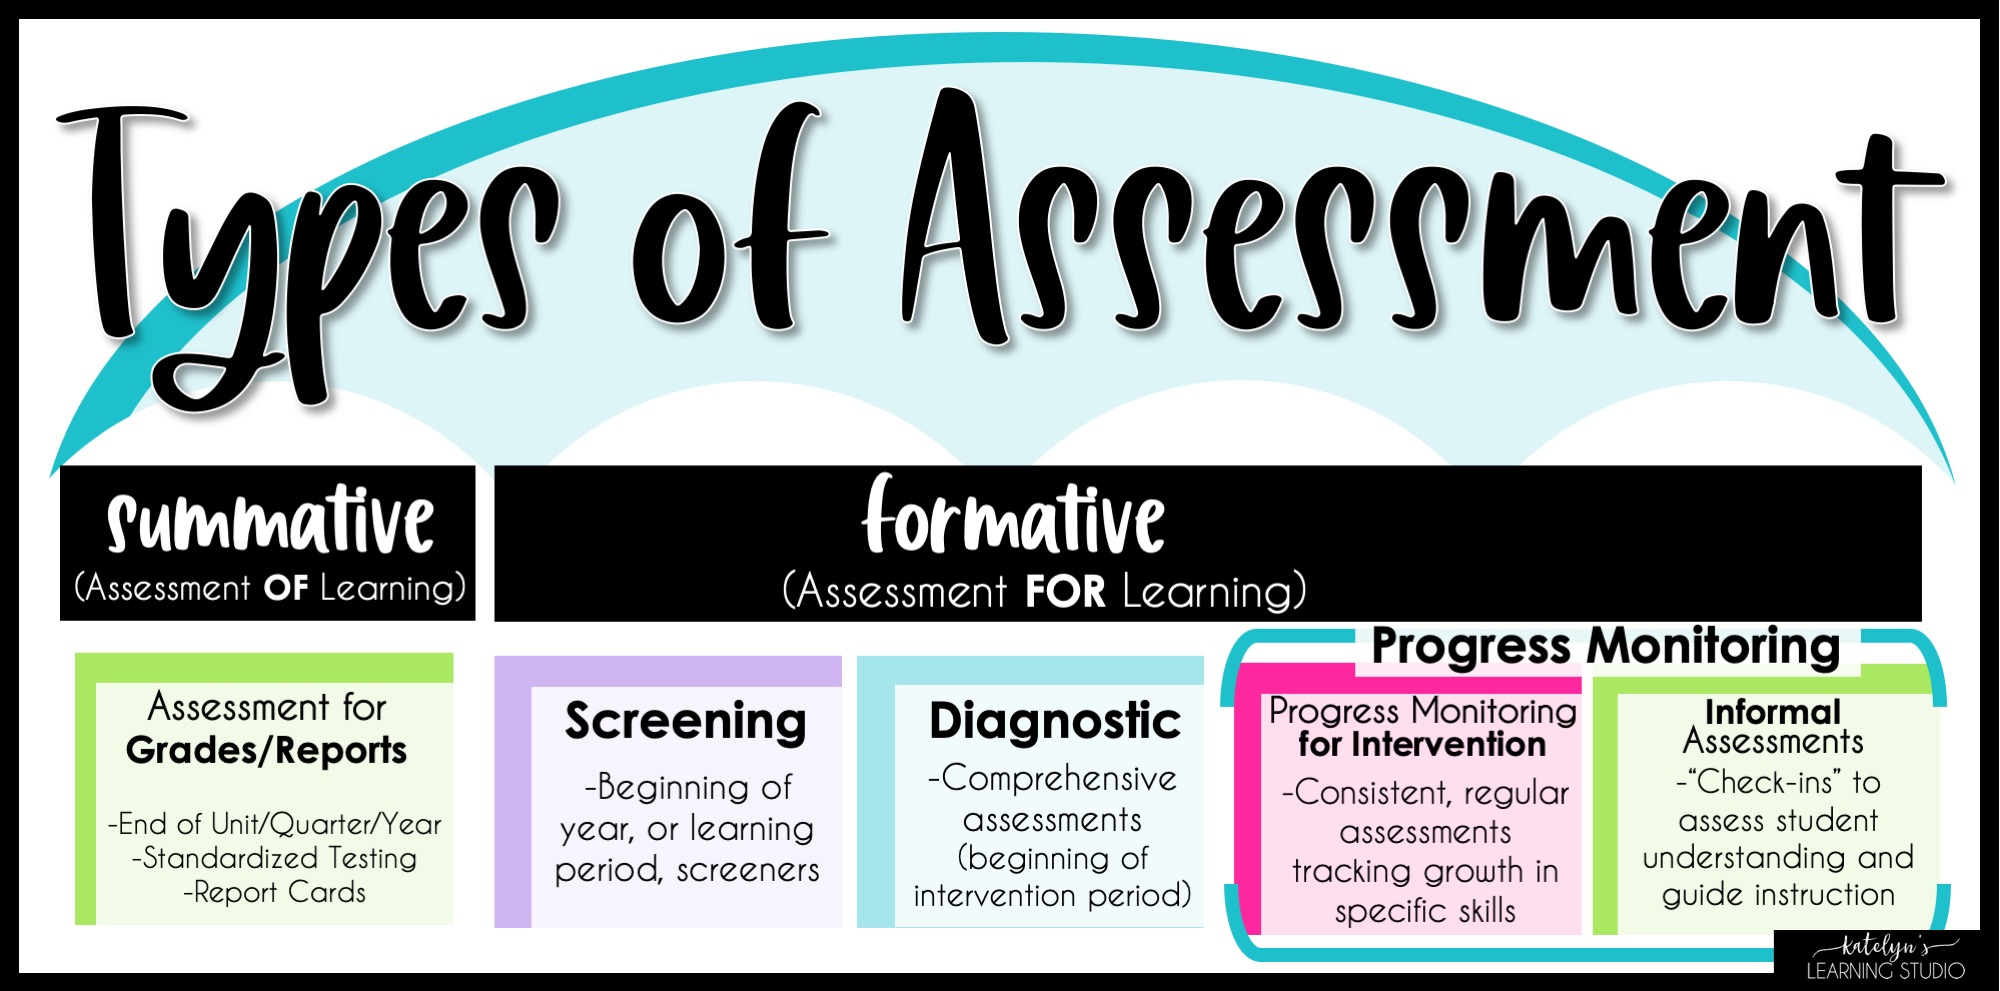 6 Types of assessment to use in your classroom